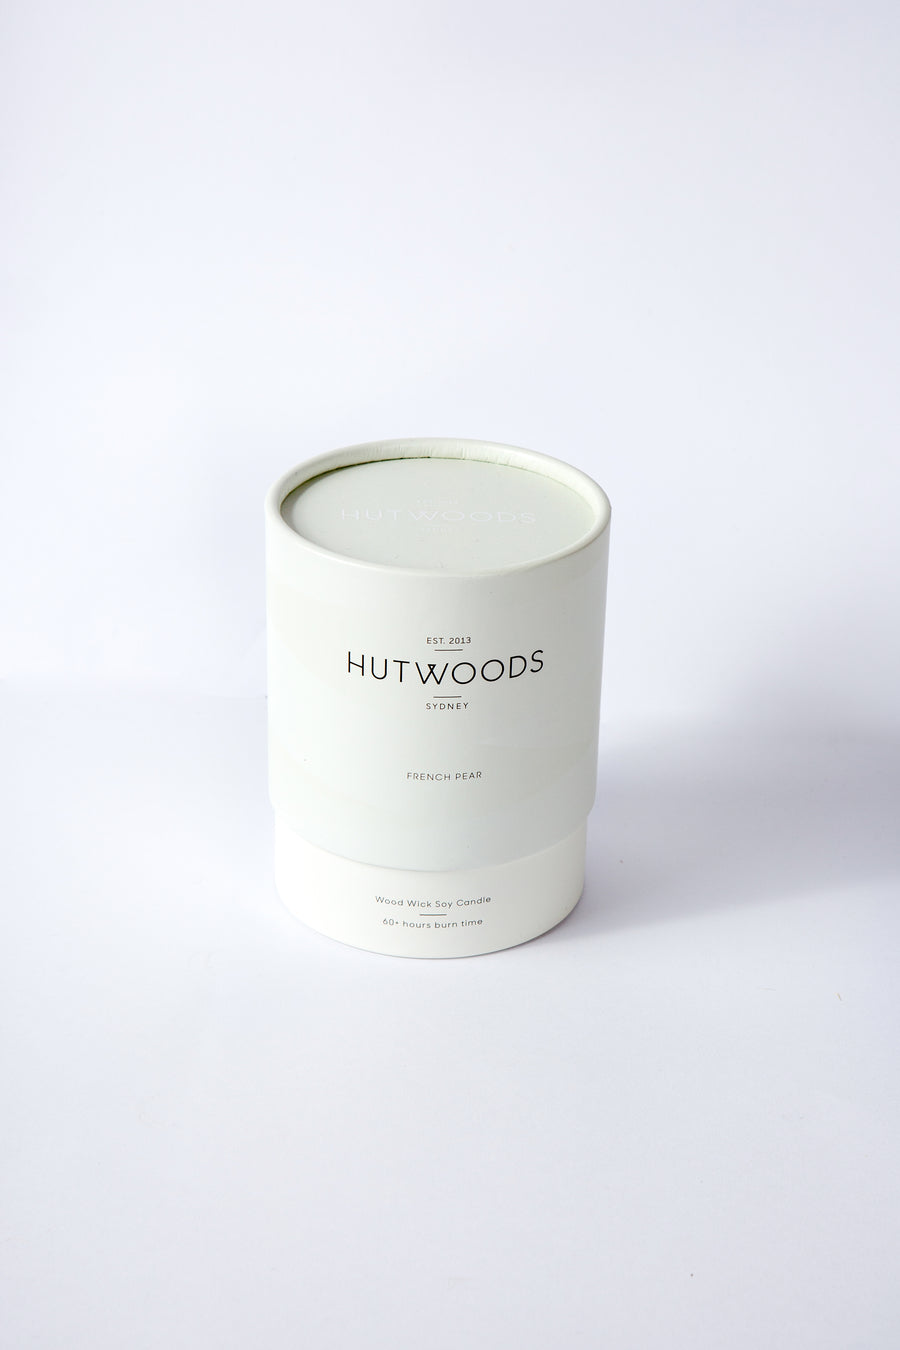 FRENCH PEAR WOODWICK CANDLE